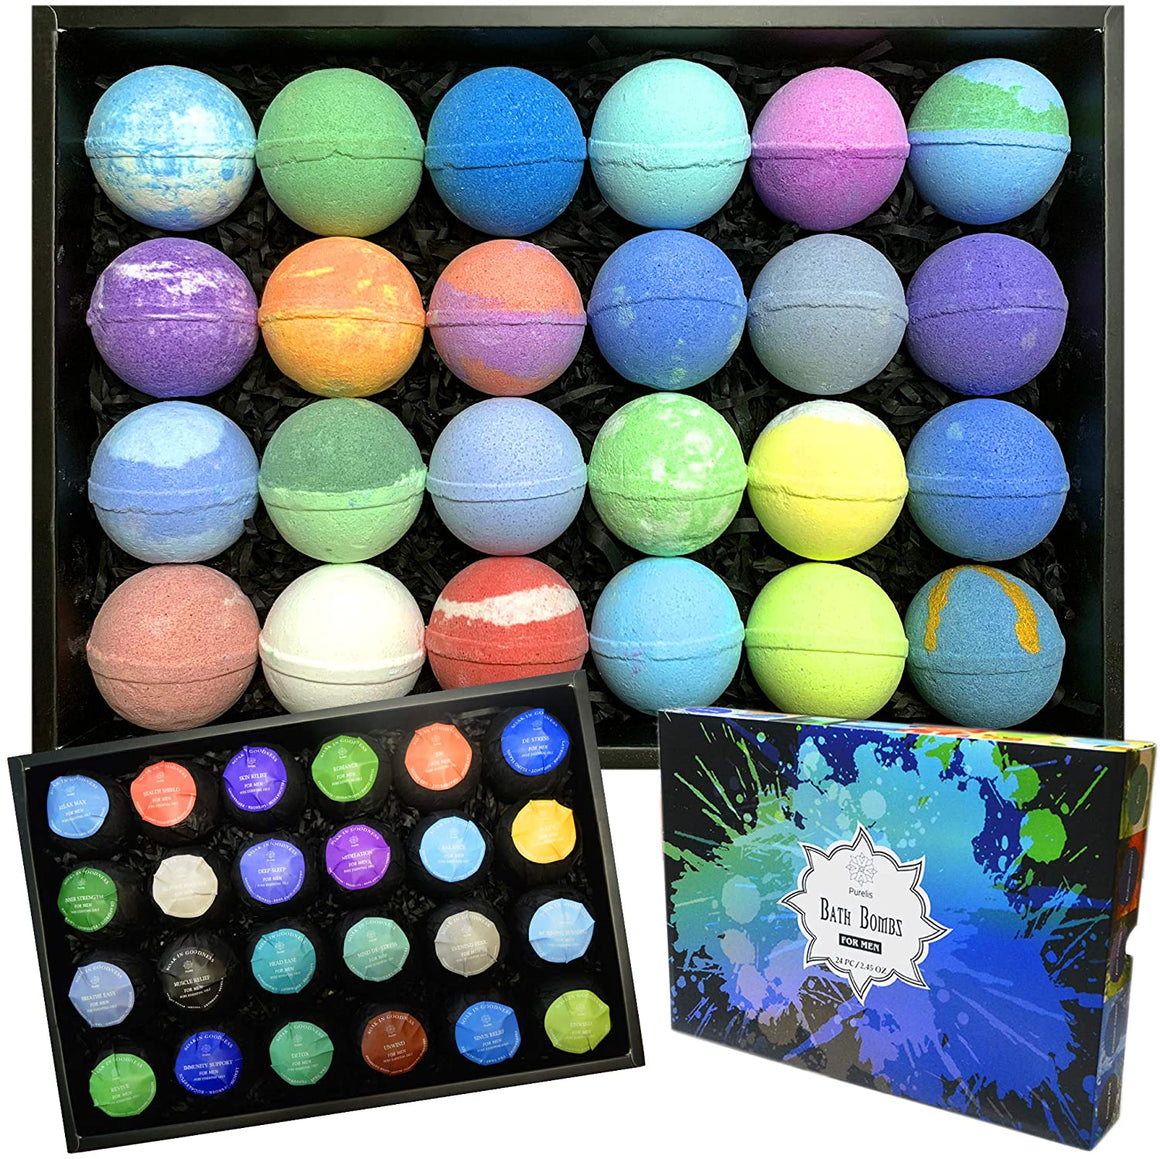 Purelis Large 24 Bath Bombs Gift Sets for Men with Shea Butter